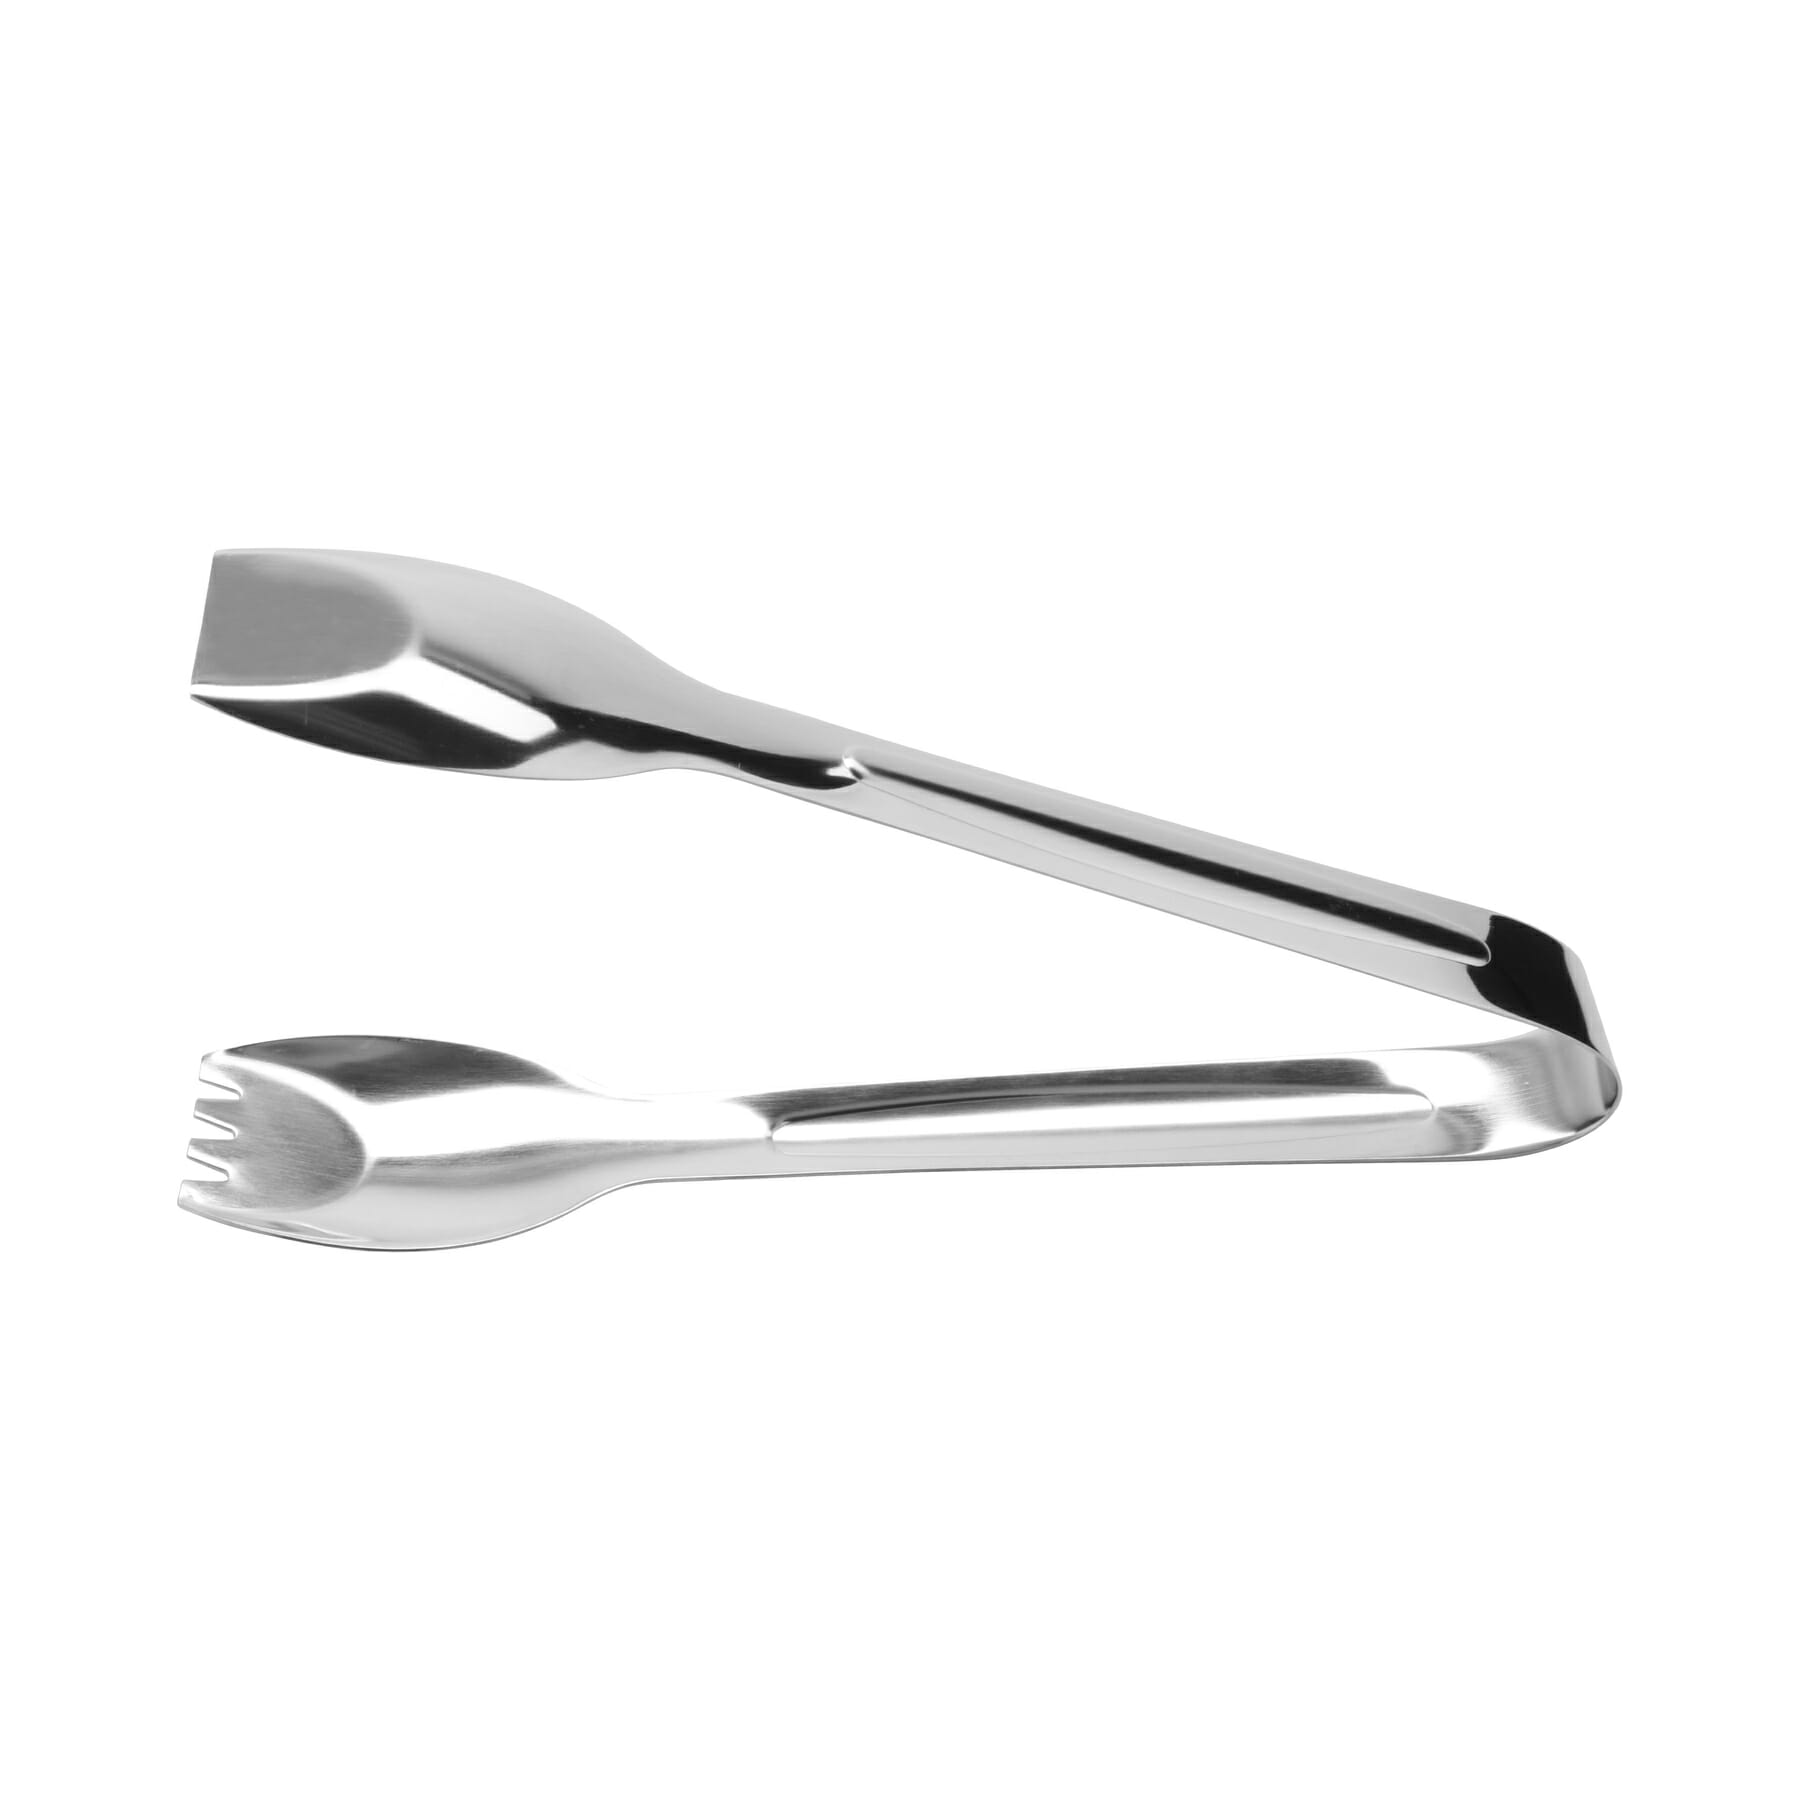 Salad Tongs For Serving 2 Packs Eco-friendly Stainless Steel Salad